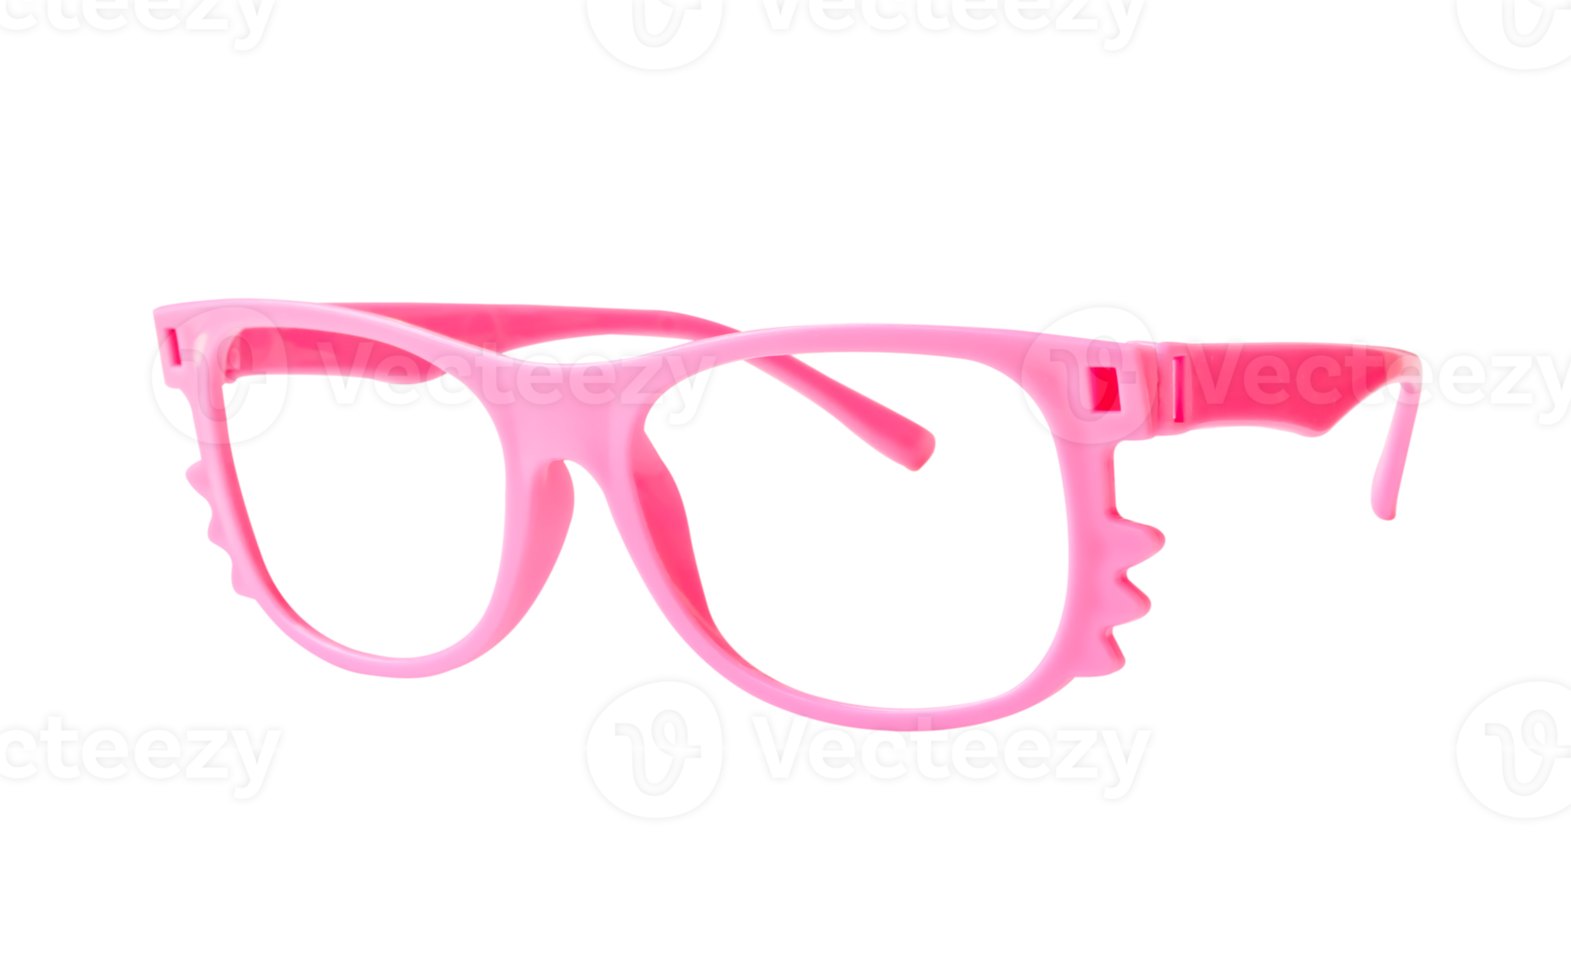 Pink sunglasses frame or rims of spectacles for lady and kid isolated with clipping path in png file format Fashion sun glasses